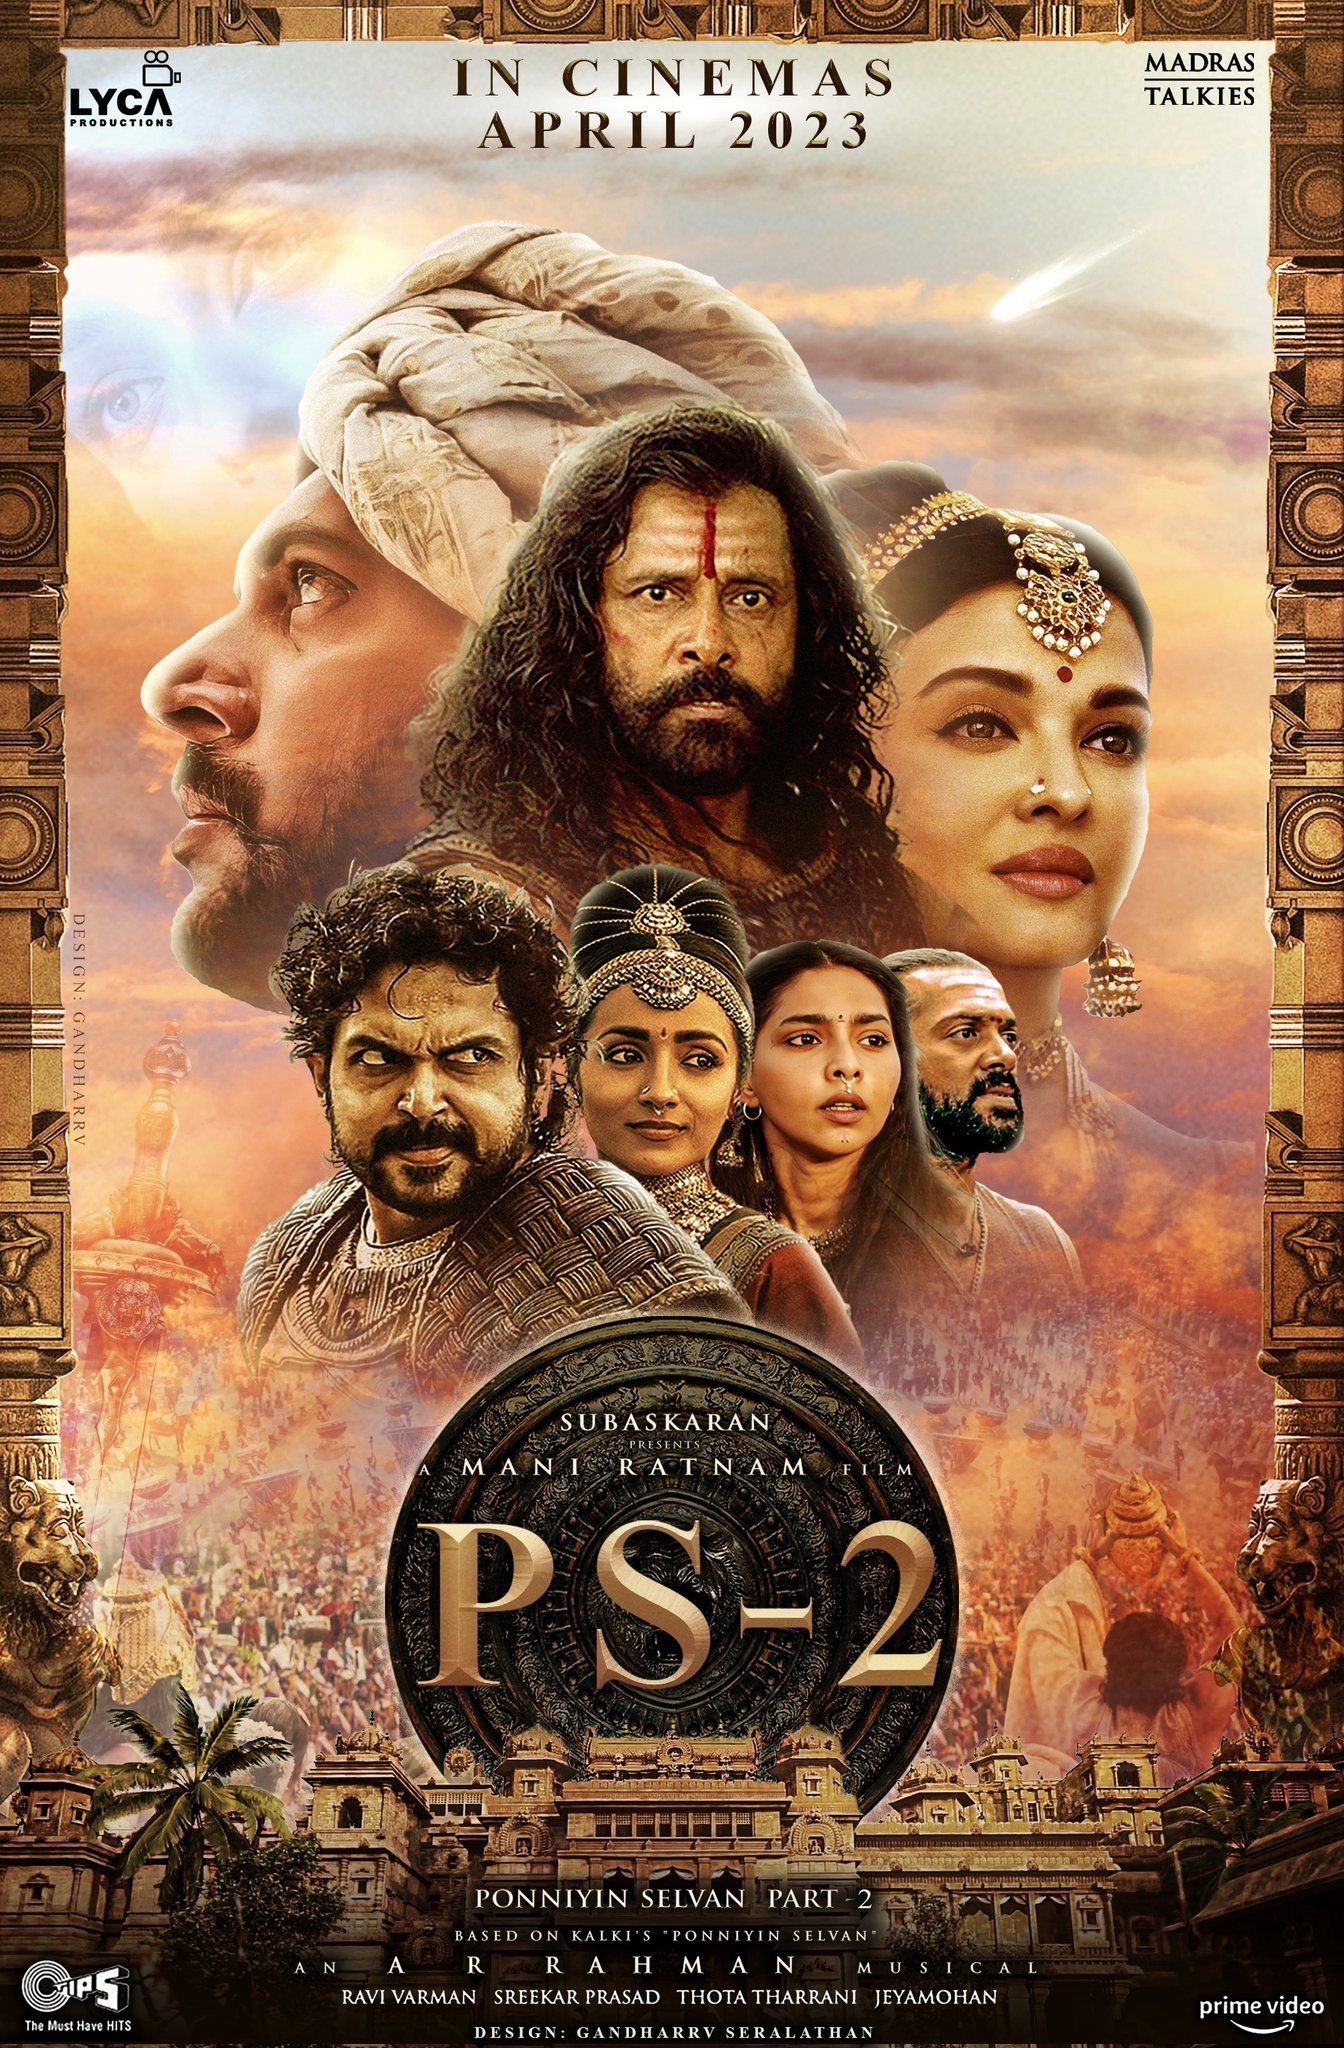 Ponniyin Selvan: Part Two 2023 Hindi Dubbed 1xBet 1080p